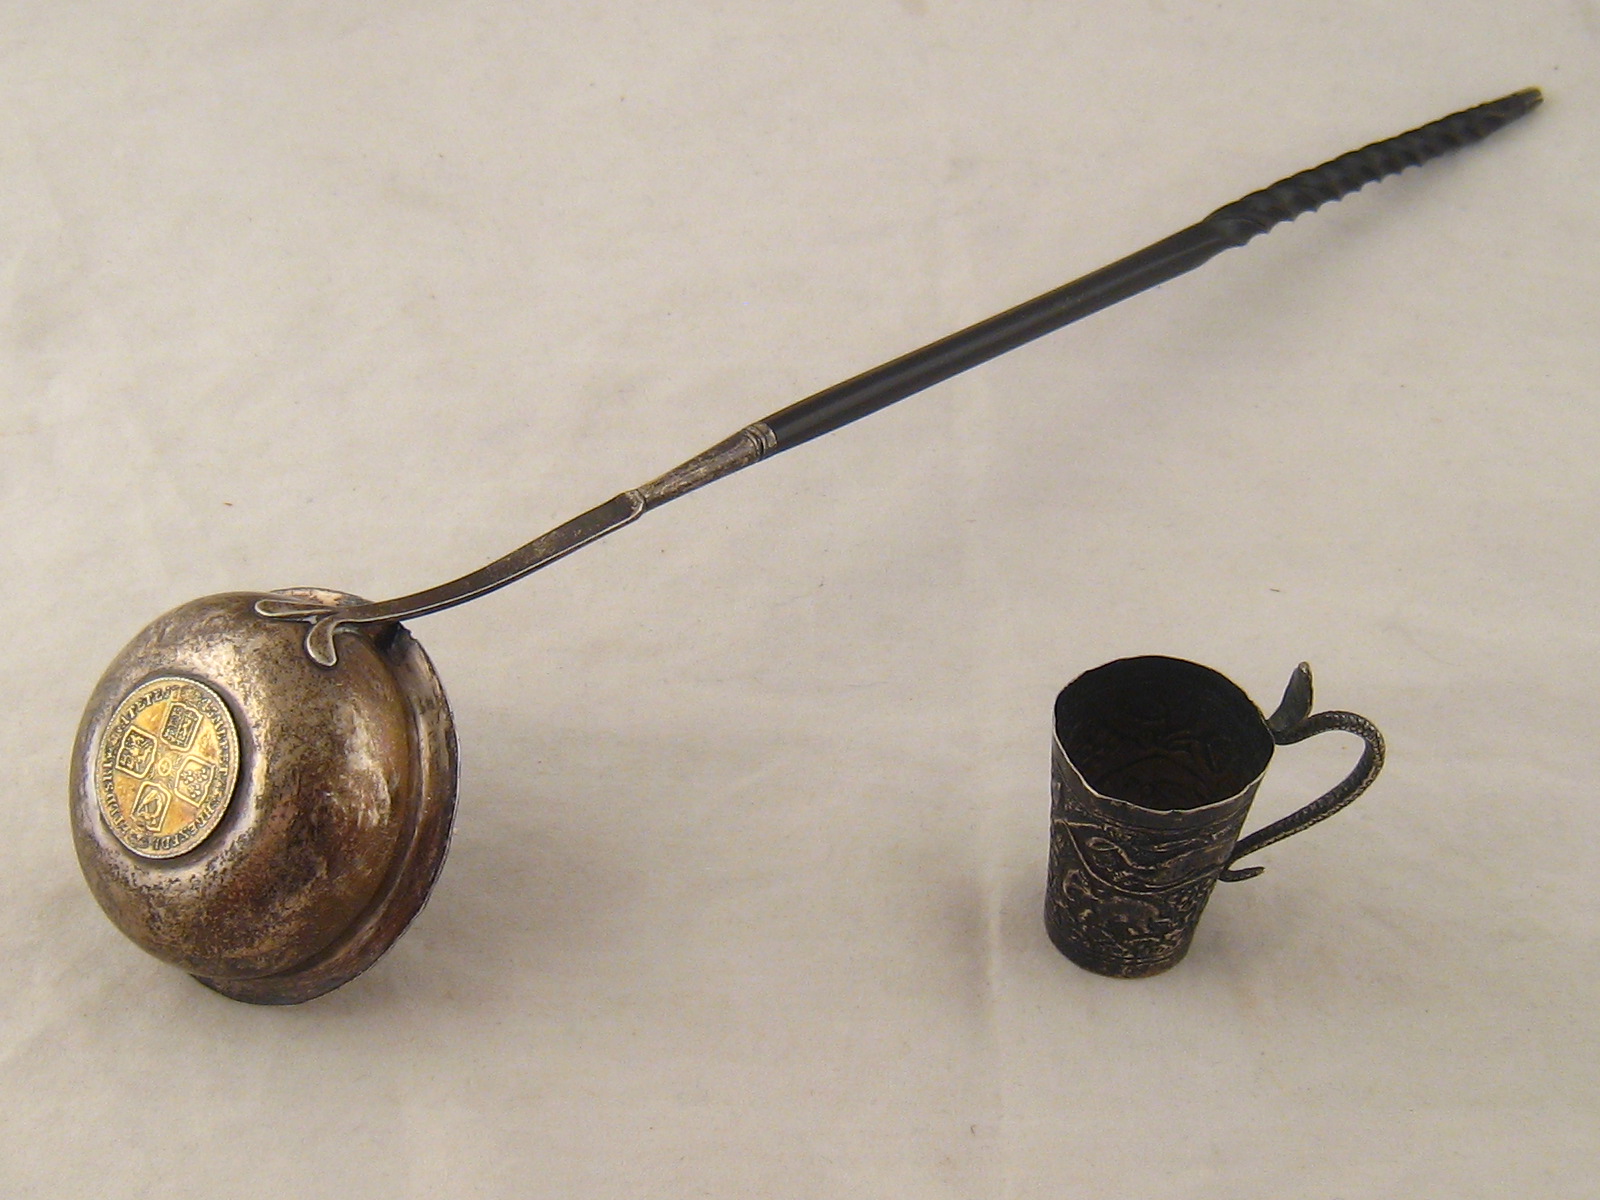 A Georgian silver toddy ladle with whalebone handle, c.1780, the bowl formed from a George II